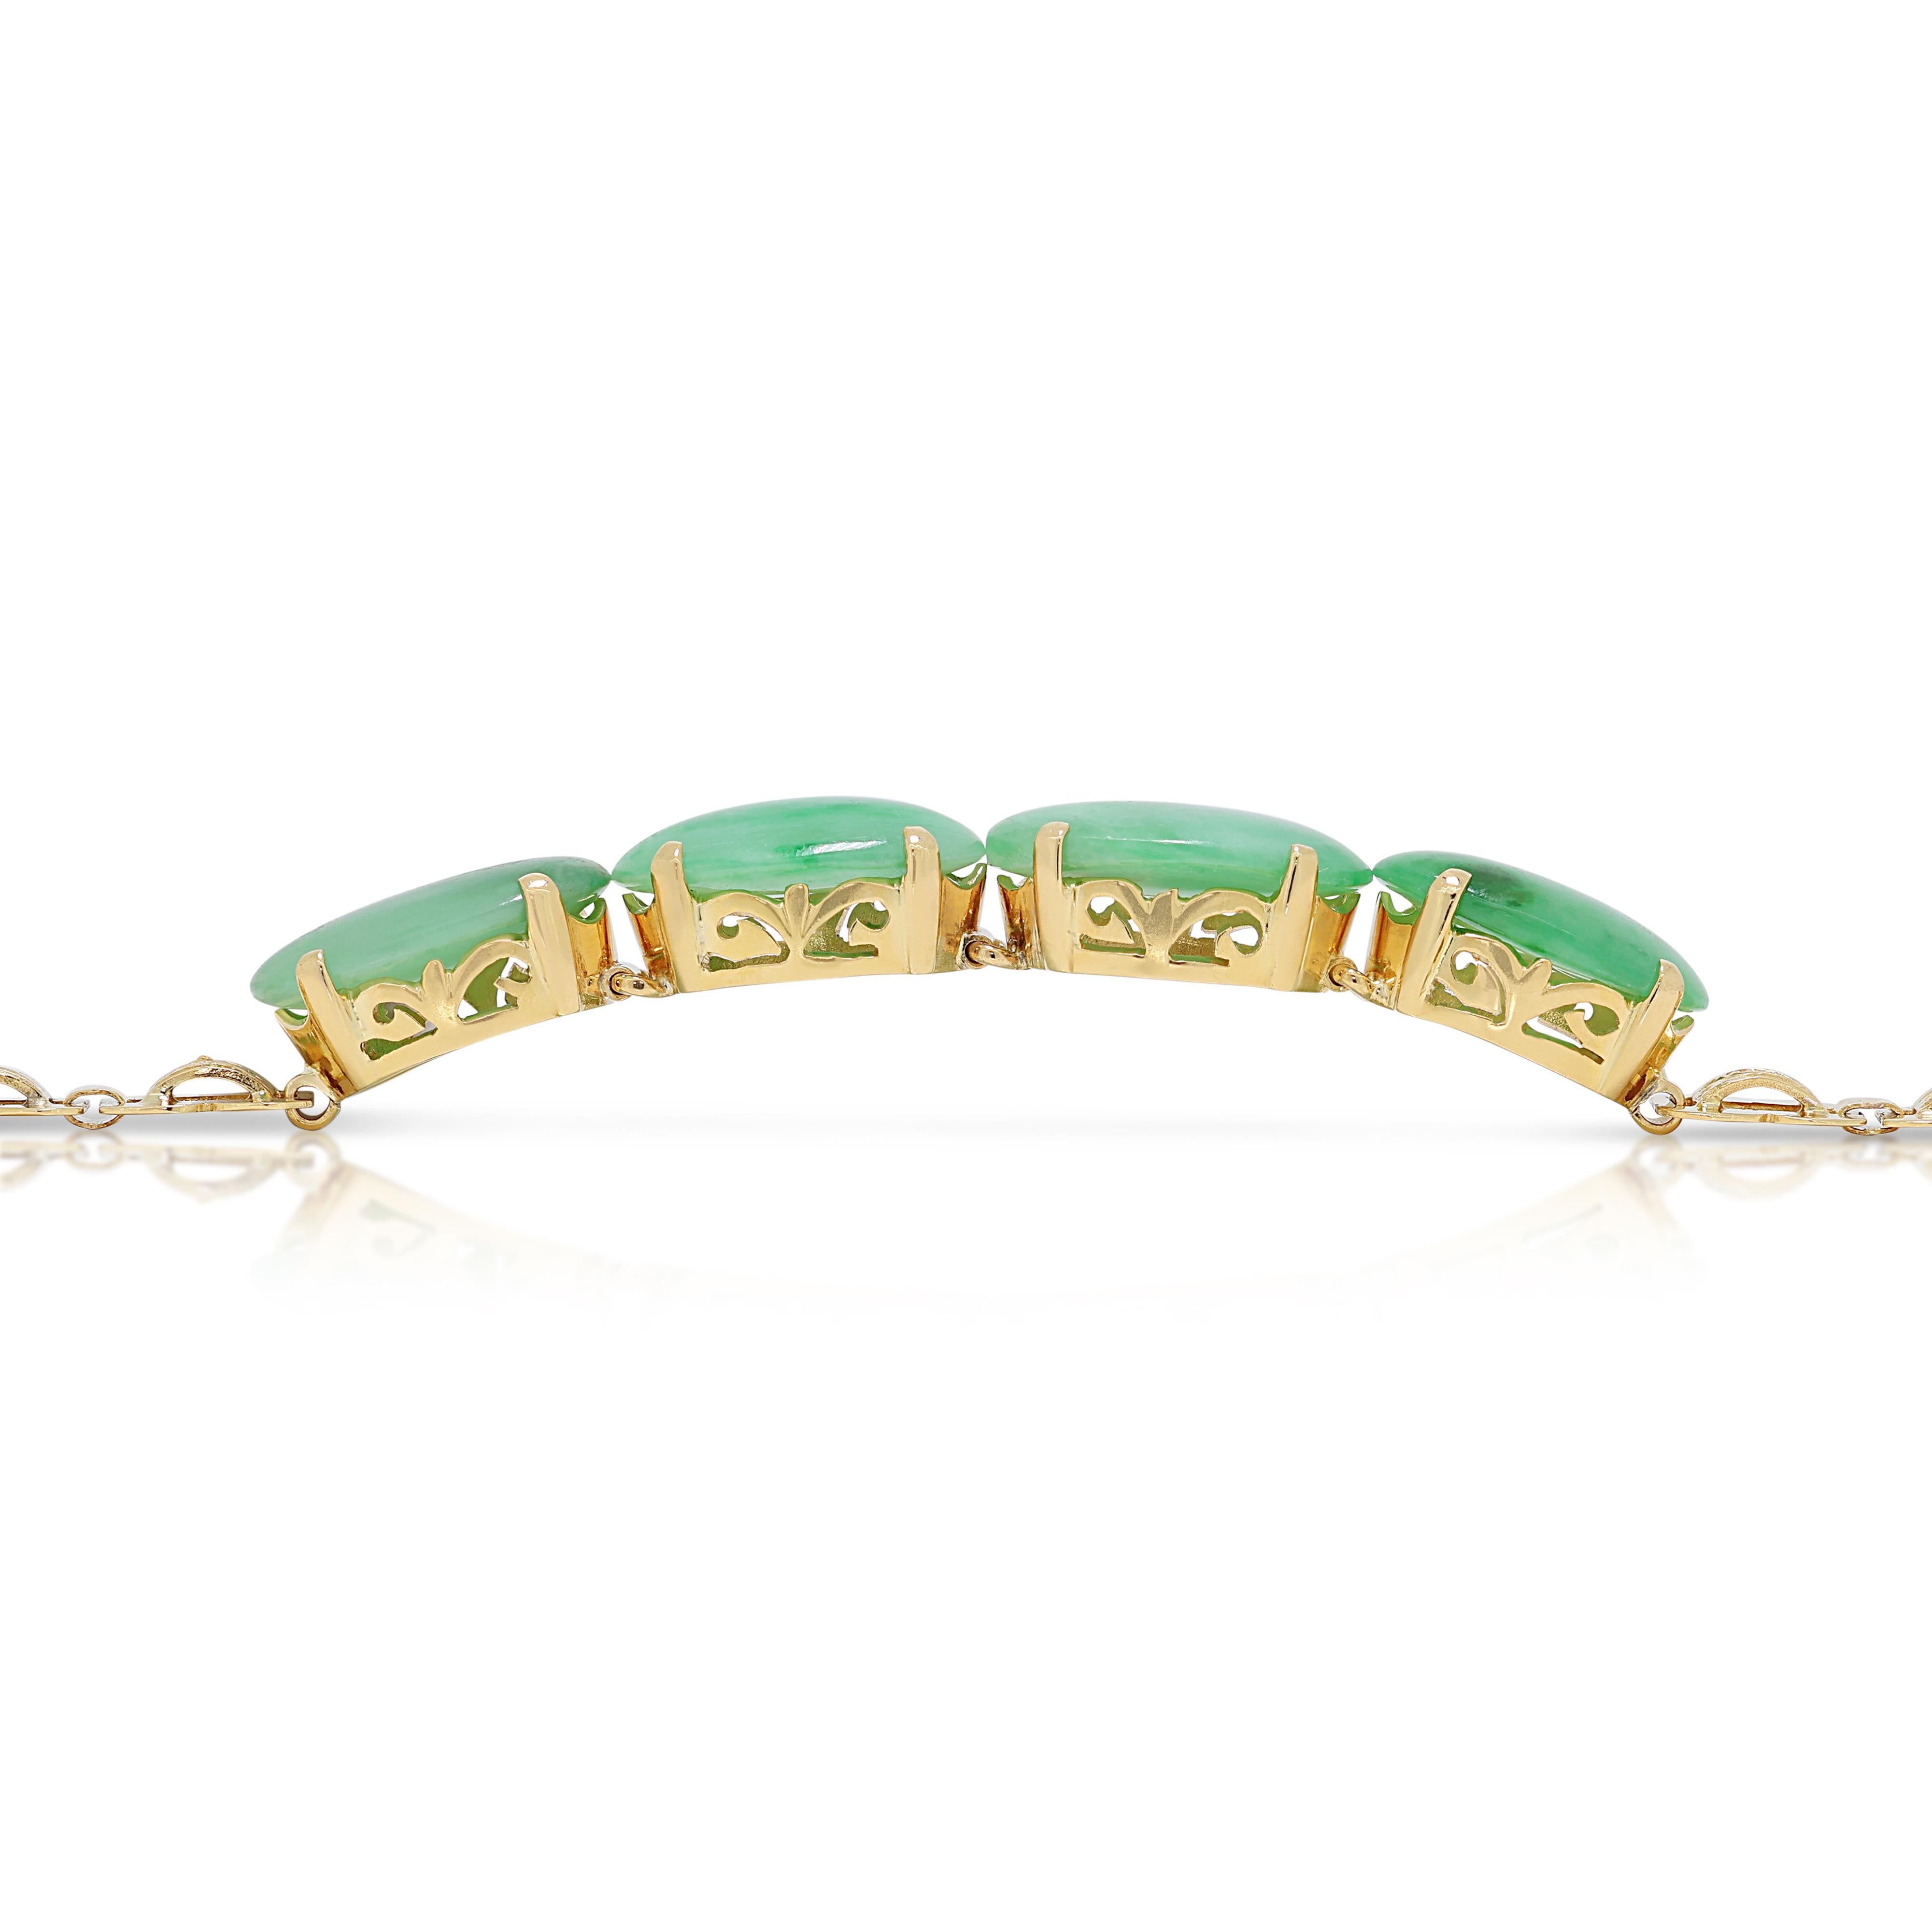 Magnificent 19.17ct Jade-Cabochon Bracelet in 22k Yellow Gold 3